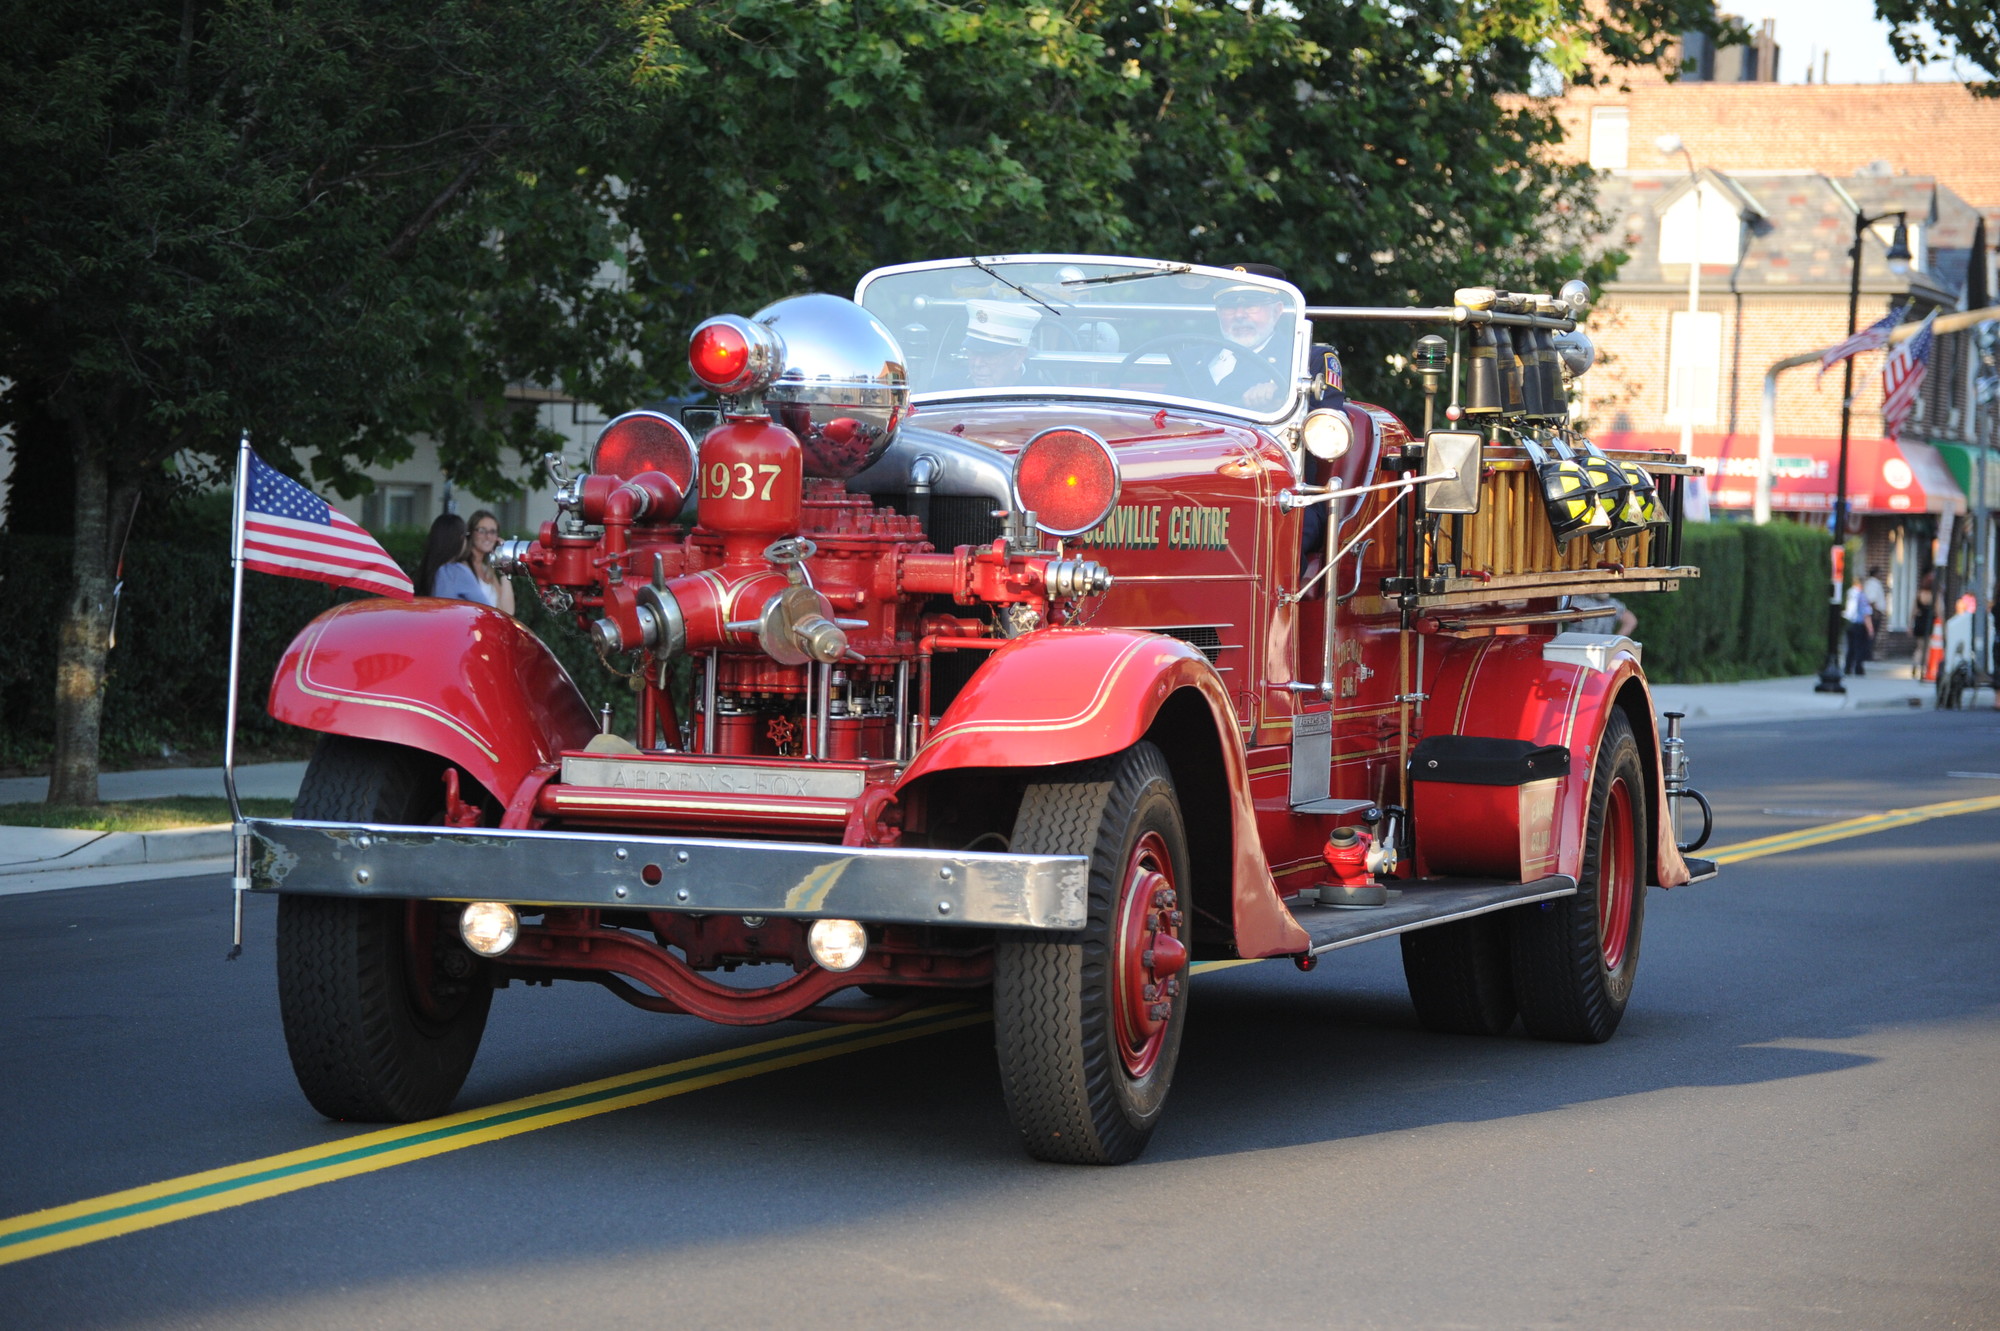 Many classic fire trucks were in the parade, like this nearly 80-year-old truck from the Rockville Centre Fire Department.